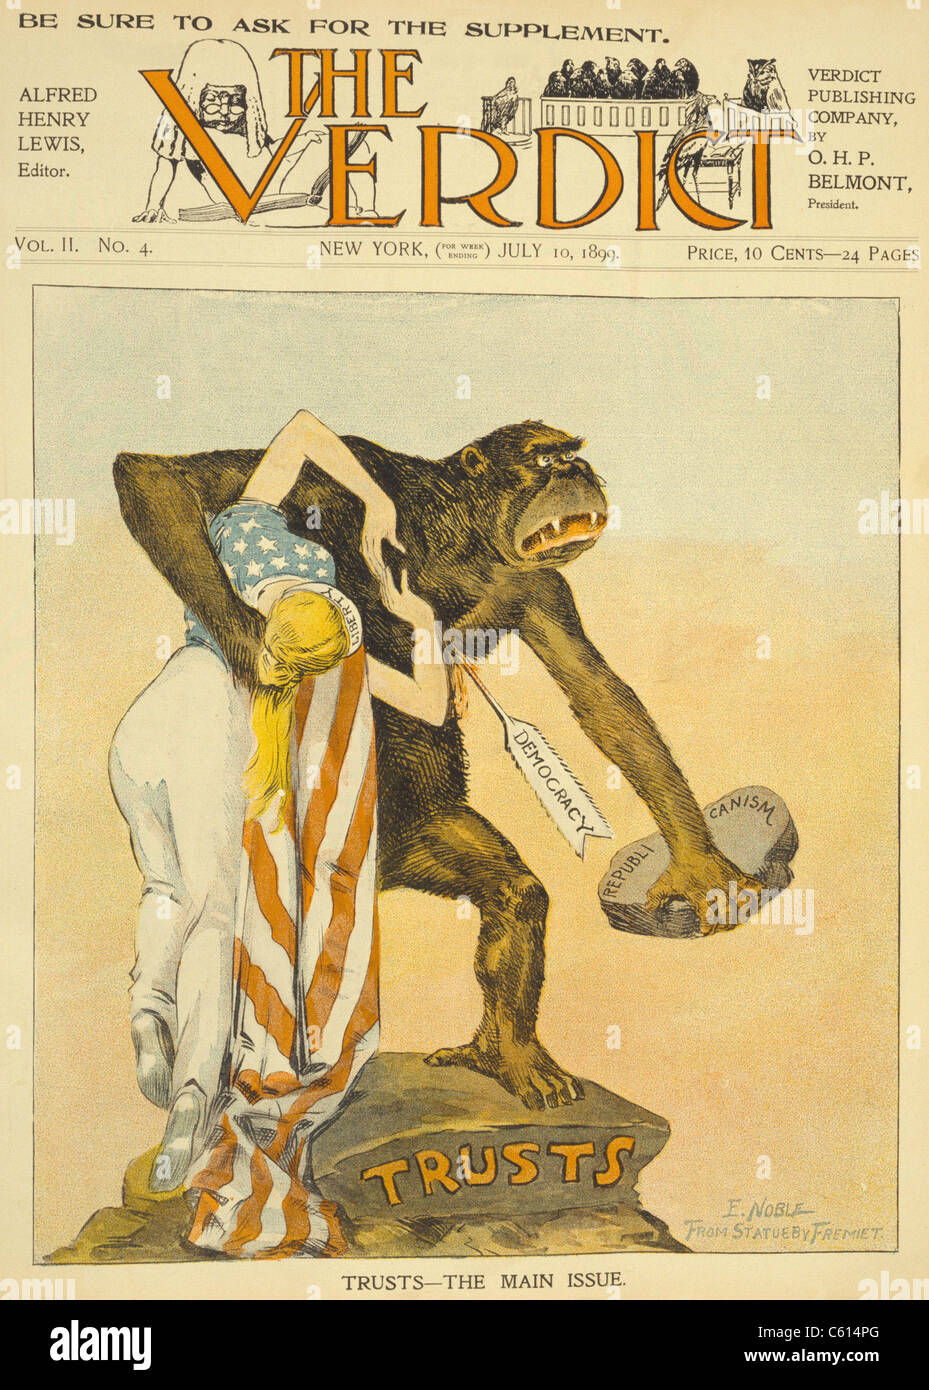 TRUST-THE MAIN ISSUE. Anti-trust and anti-Republican Party cartoon by E. Noble on the cover of VERDICT. An ape representing Industrial trusts clutches Lady Liberty in one arm and holding a stone labeled 'Republicanism'. The ape has been shot with an arr (BSLOC 2010 18 56) Stock Photo